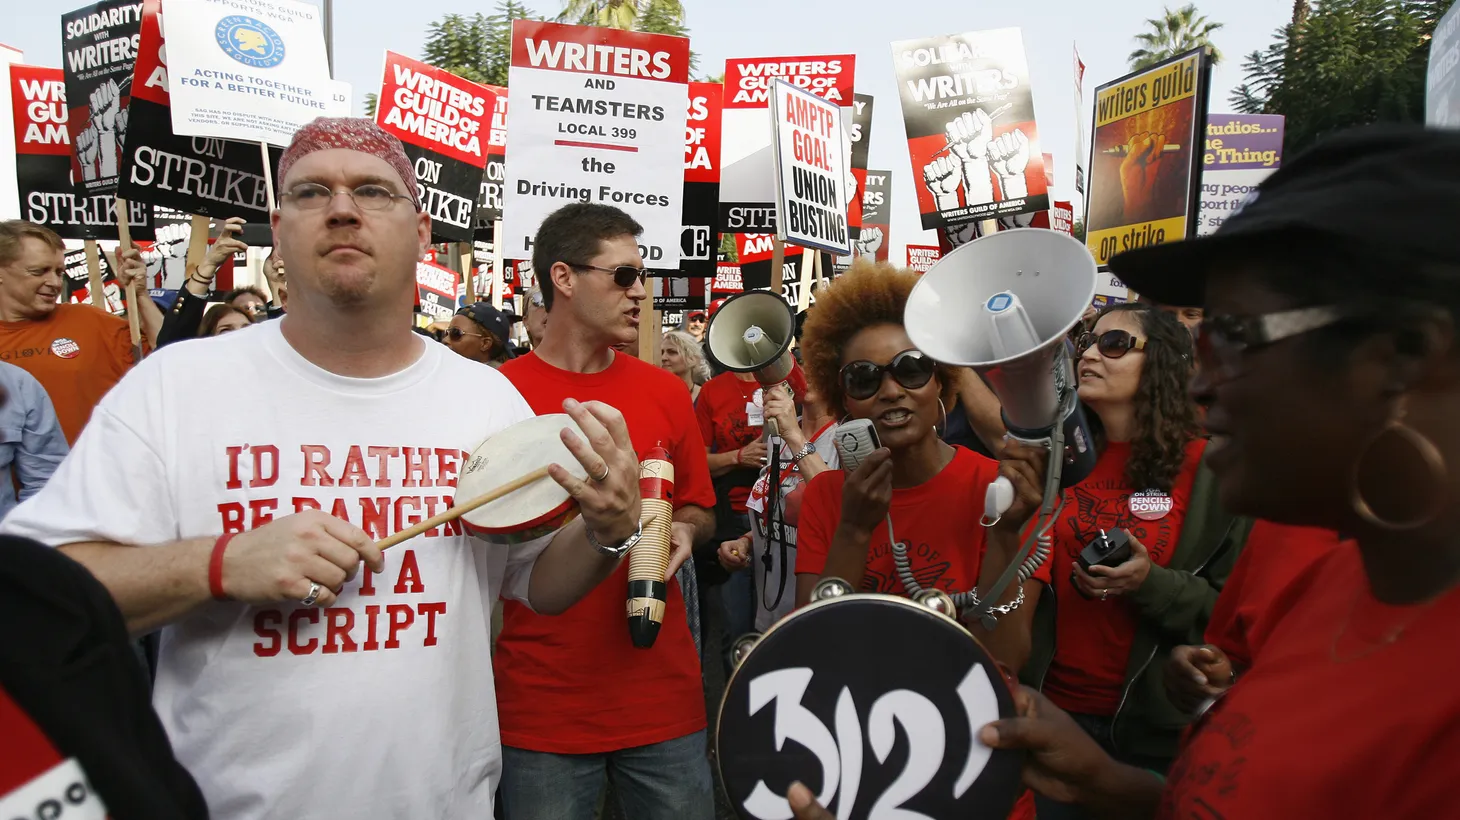 Striking members of the Writers Guild of America, West chant during a rally in Hollywood, California, November 20, 2007.